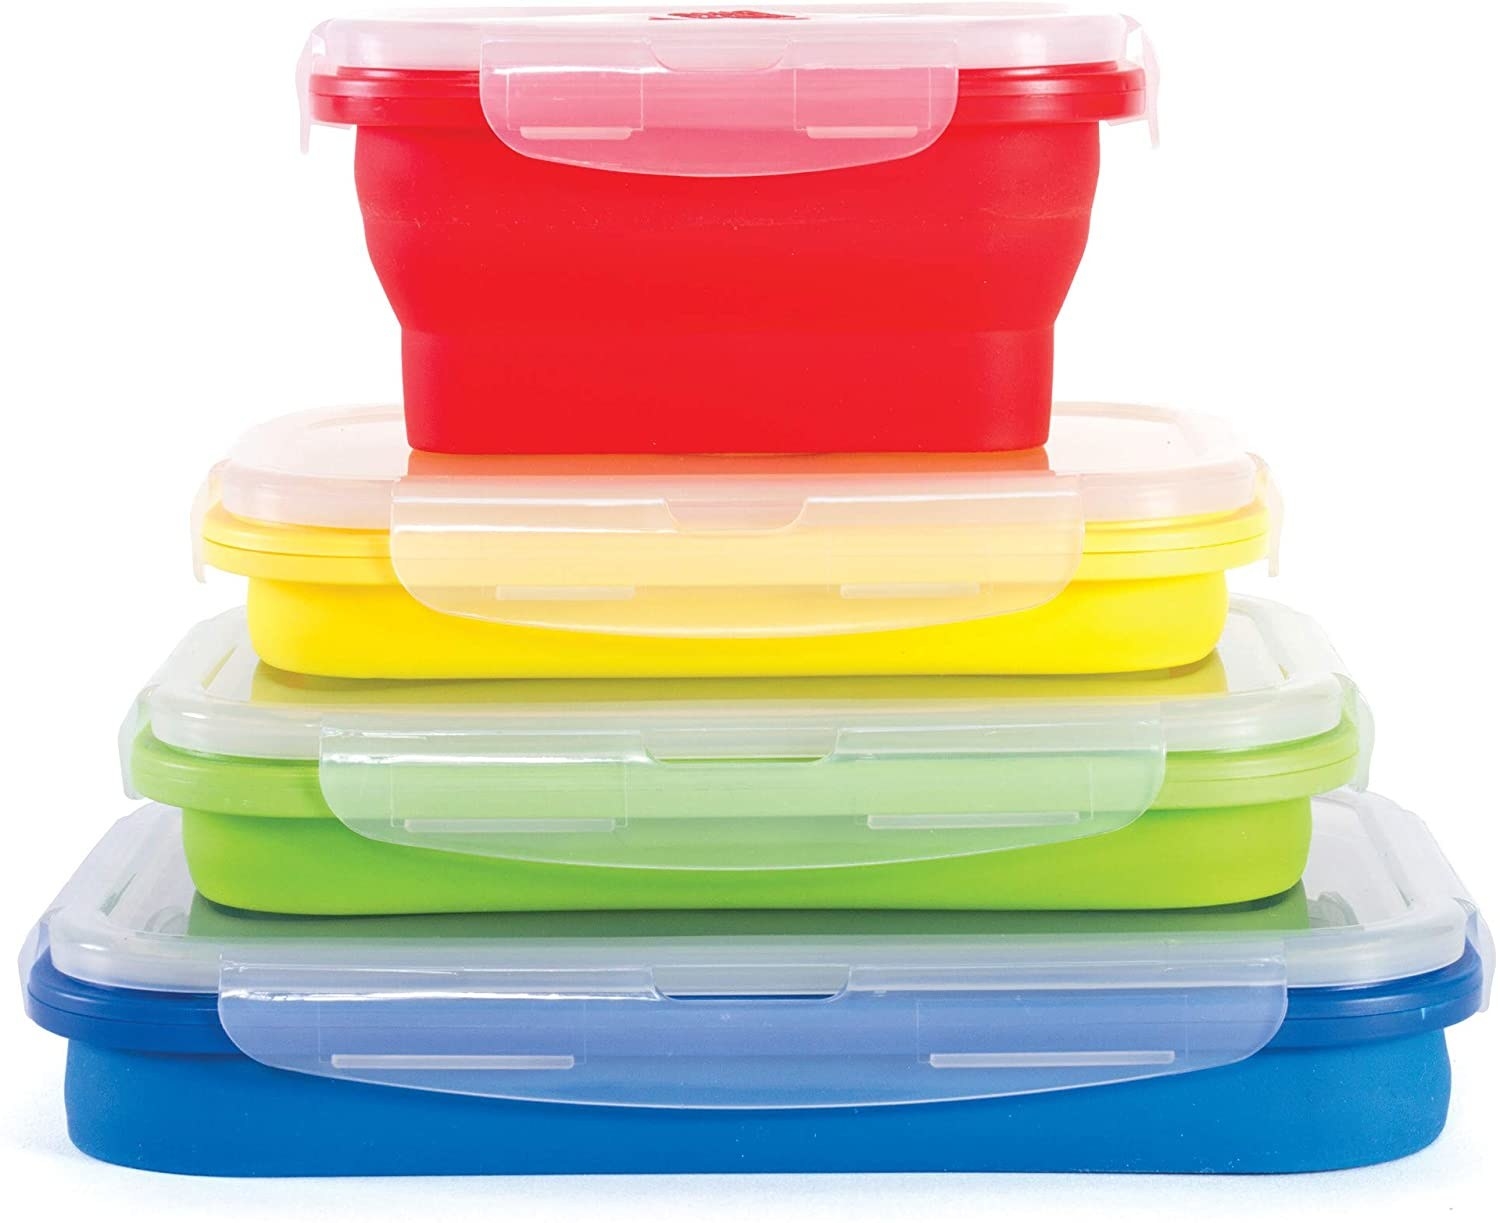 The collapsible containers in a stack from small to big in red, yellow, green, and blue